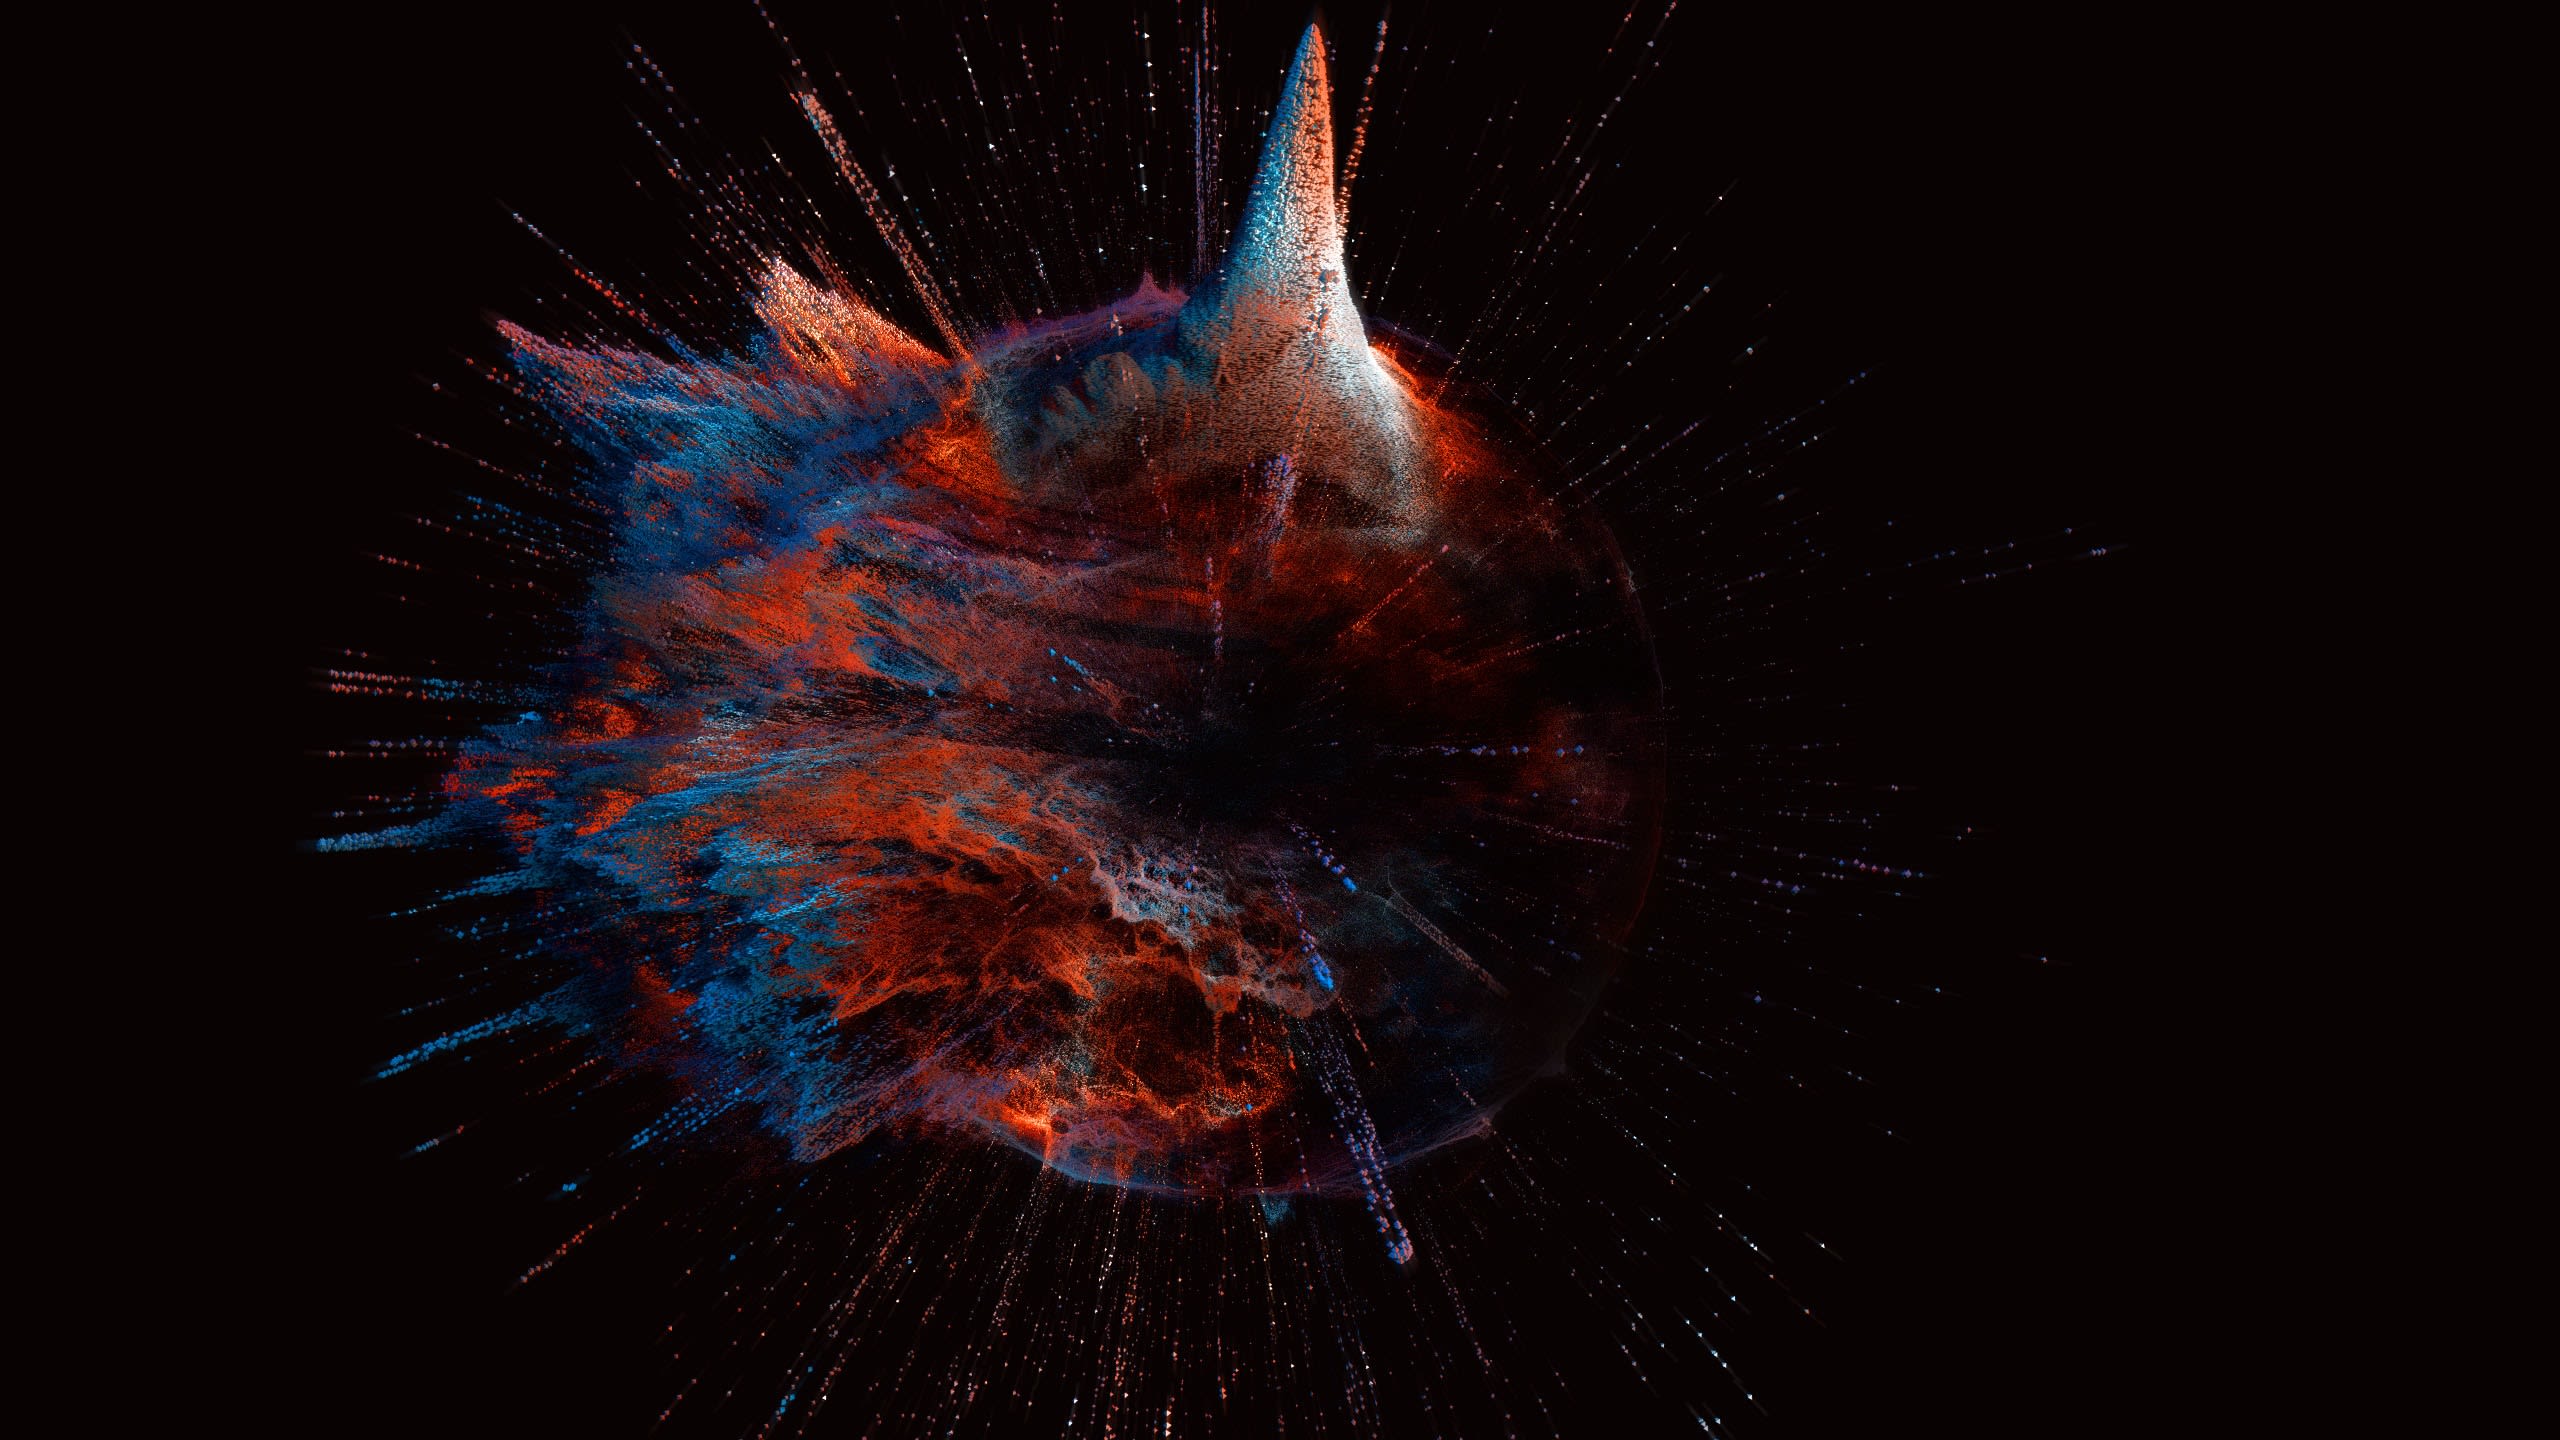 An explosion of colours on a dark background